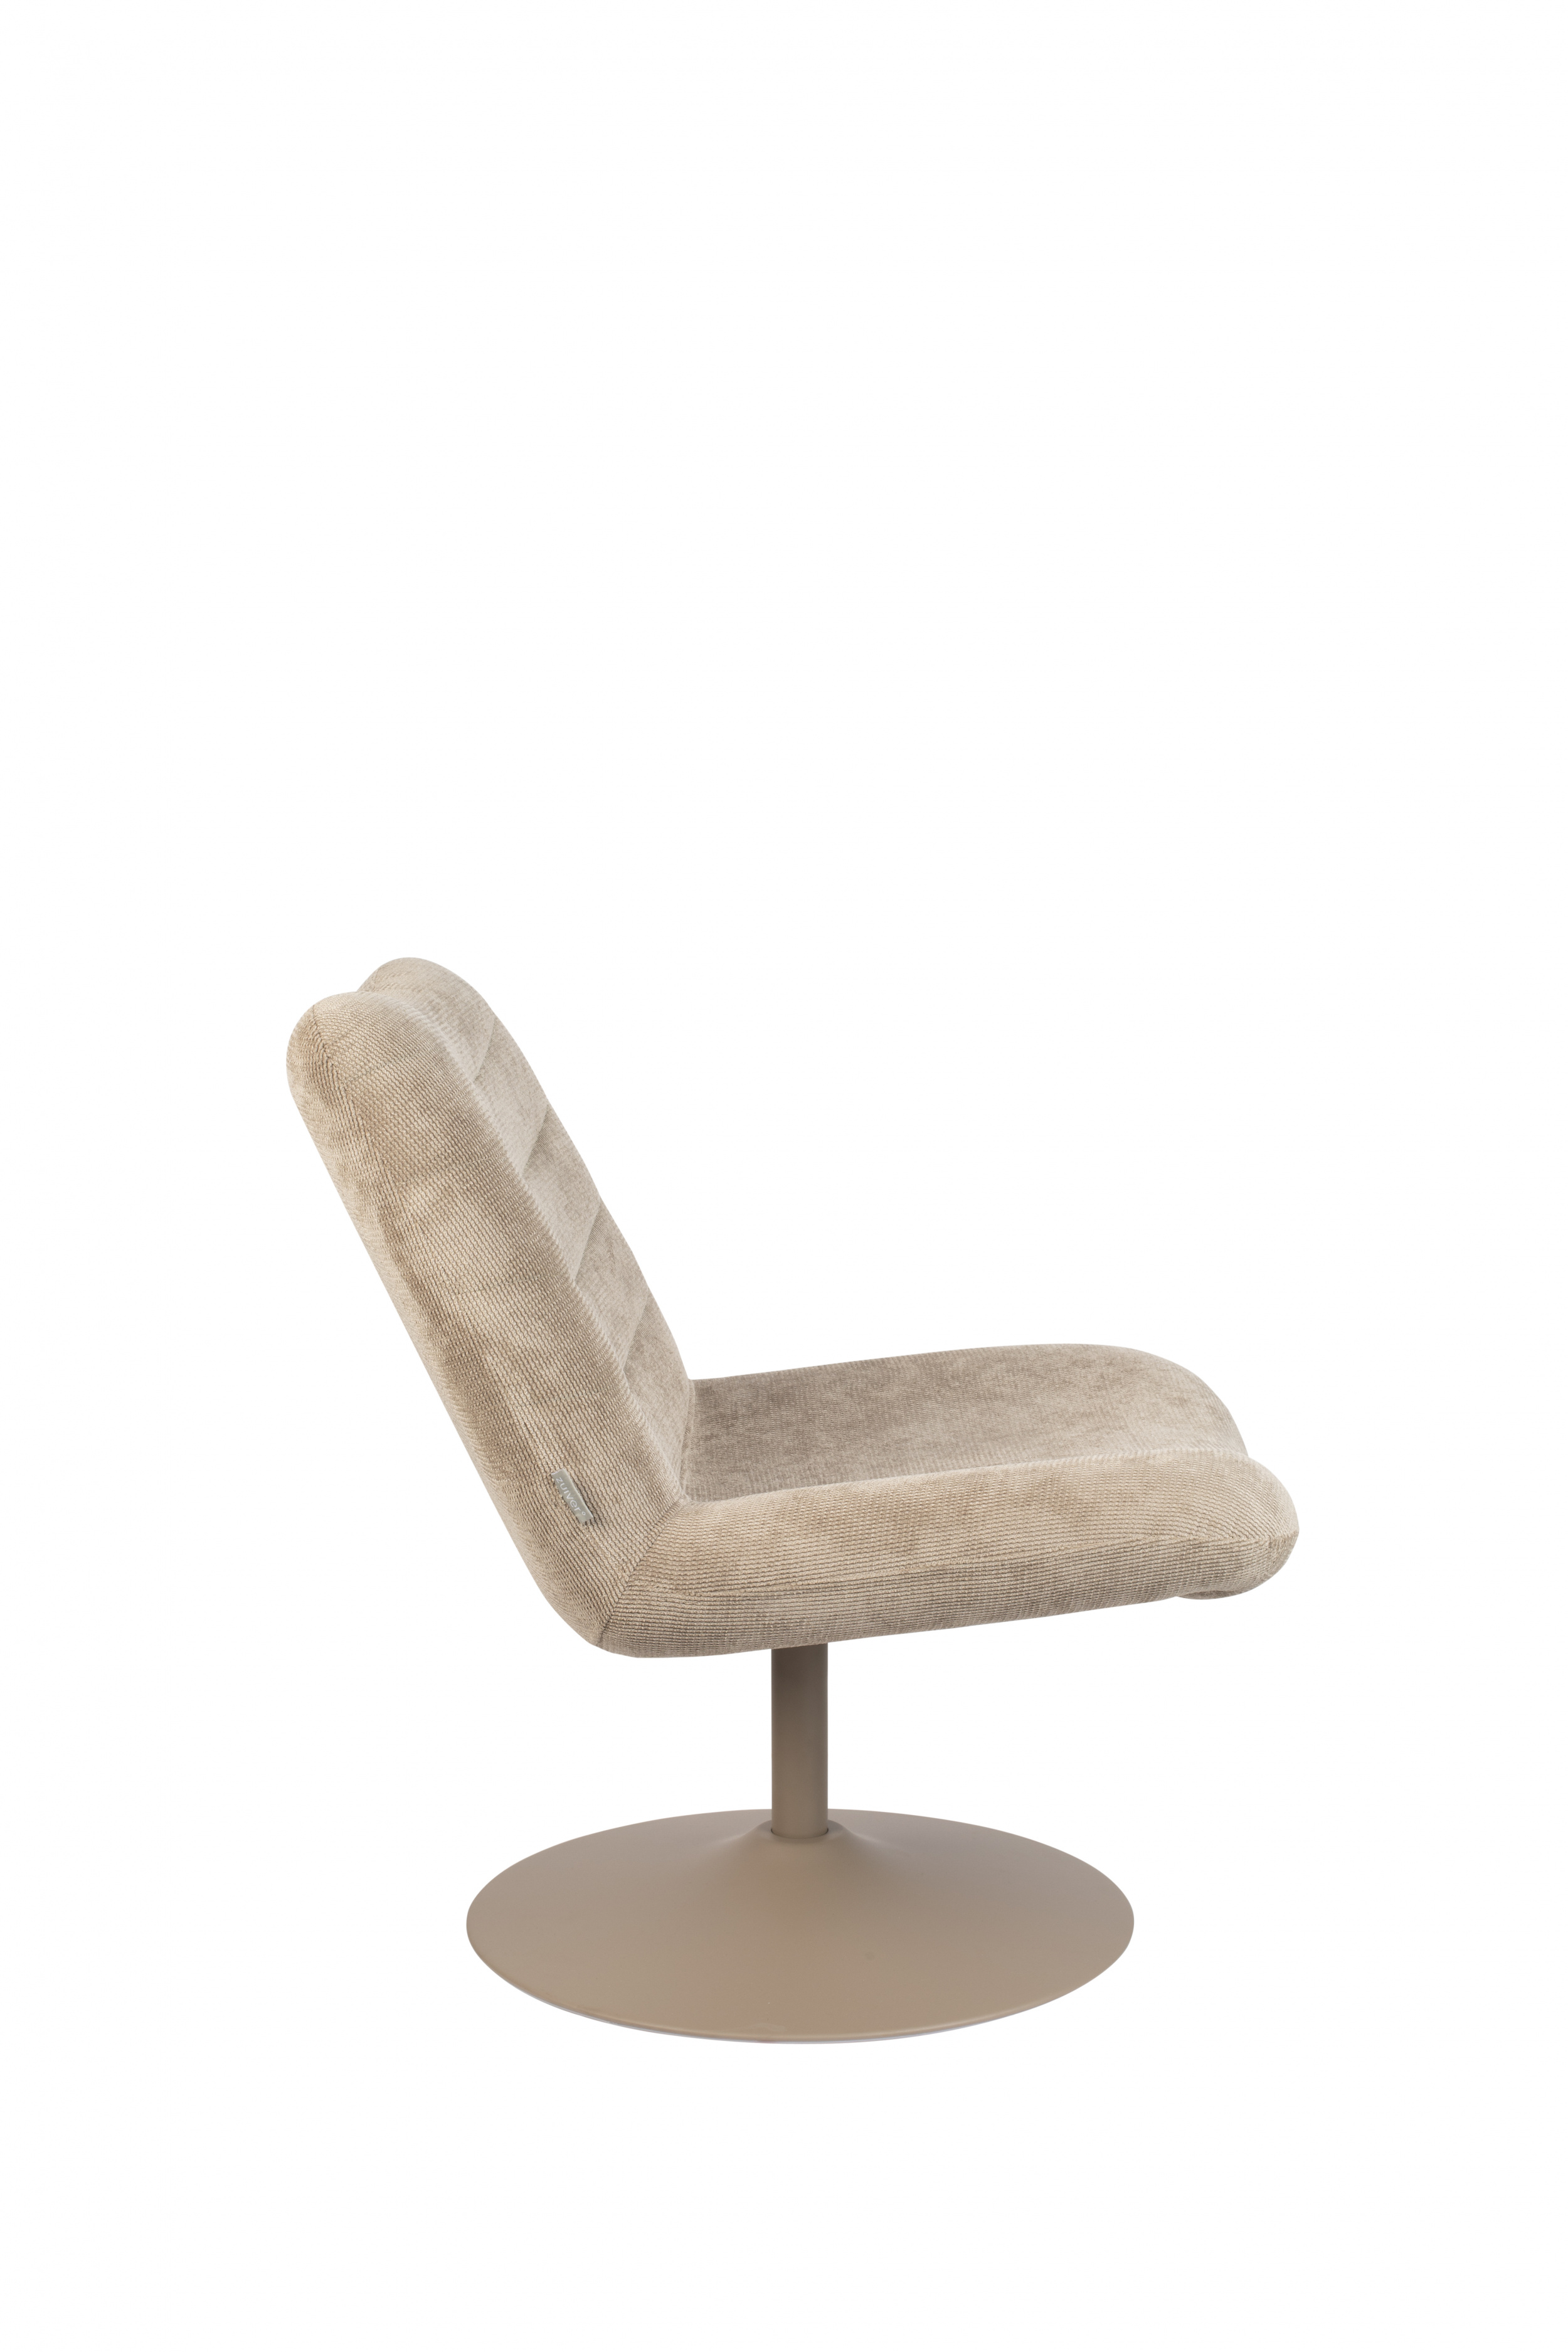 Zuiver Lounge Chair Bubba Beige